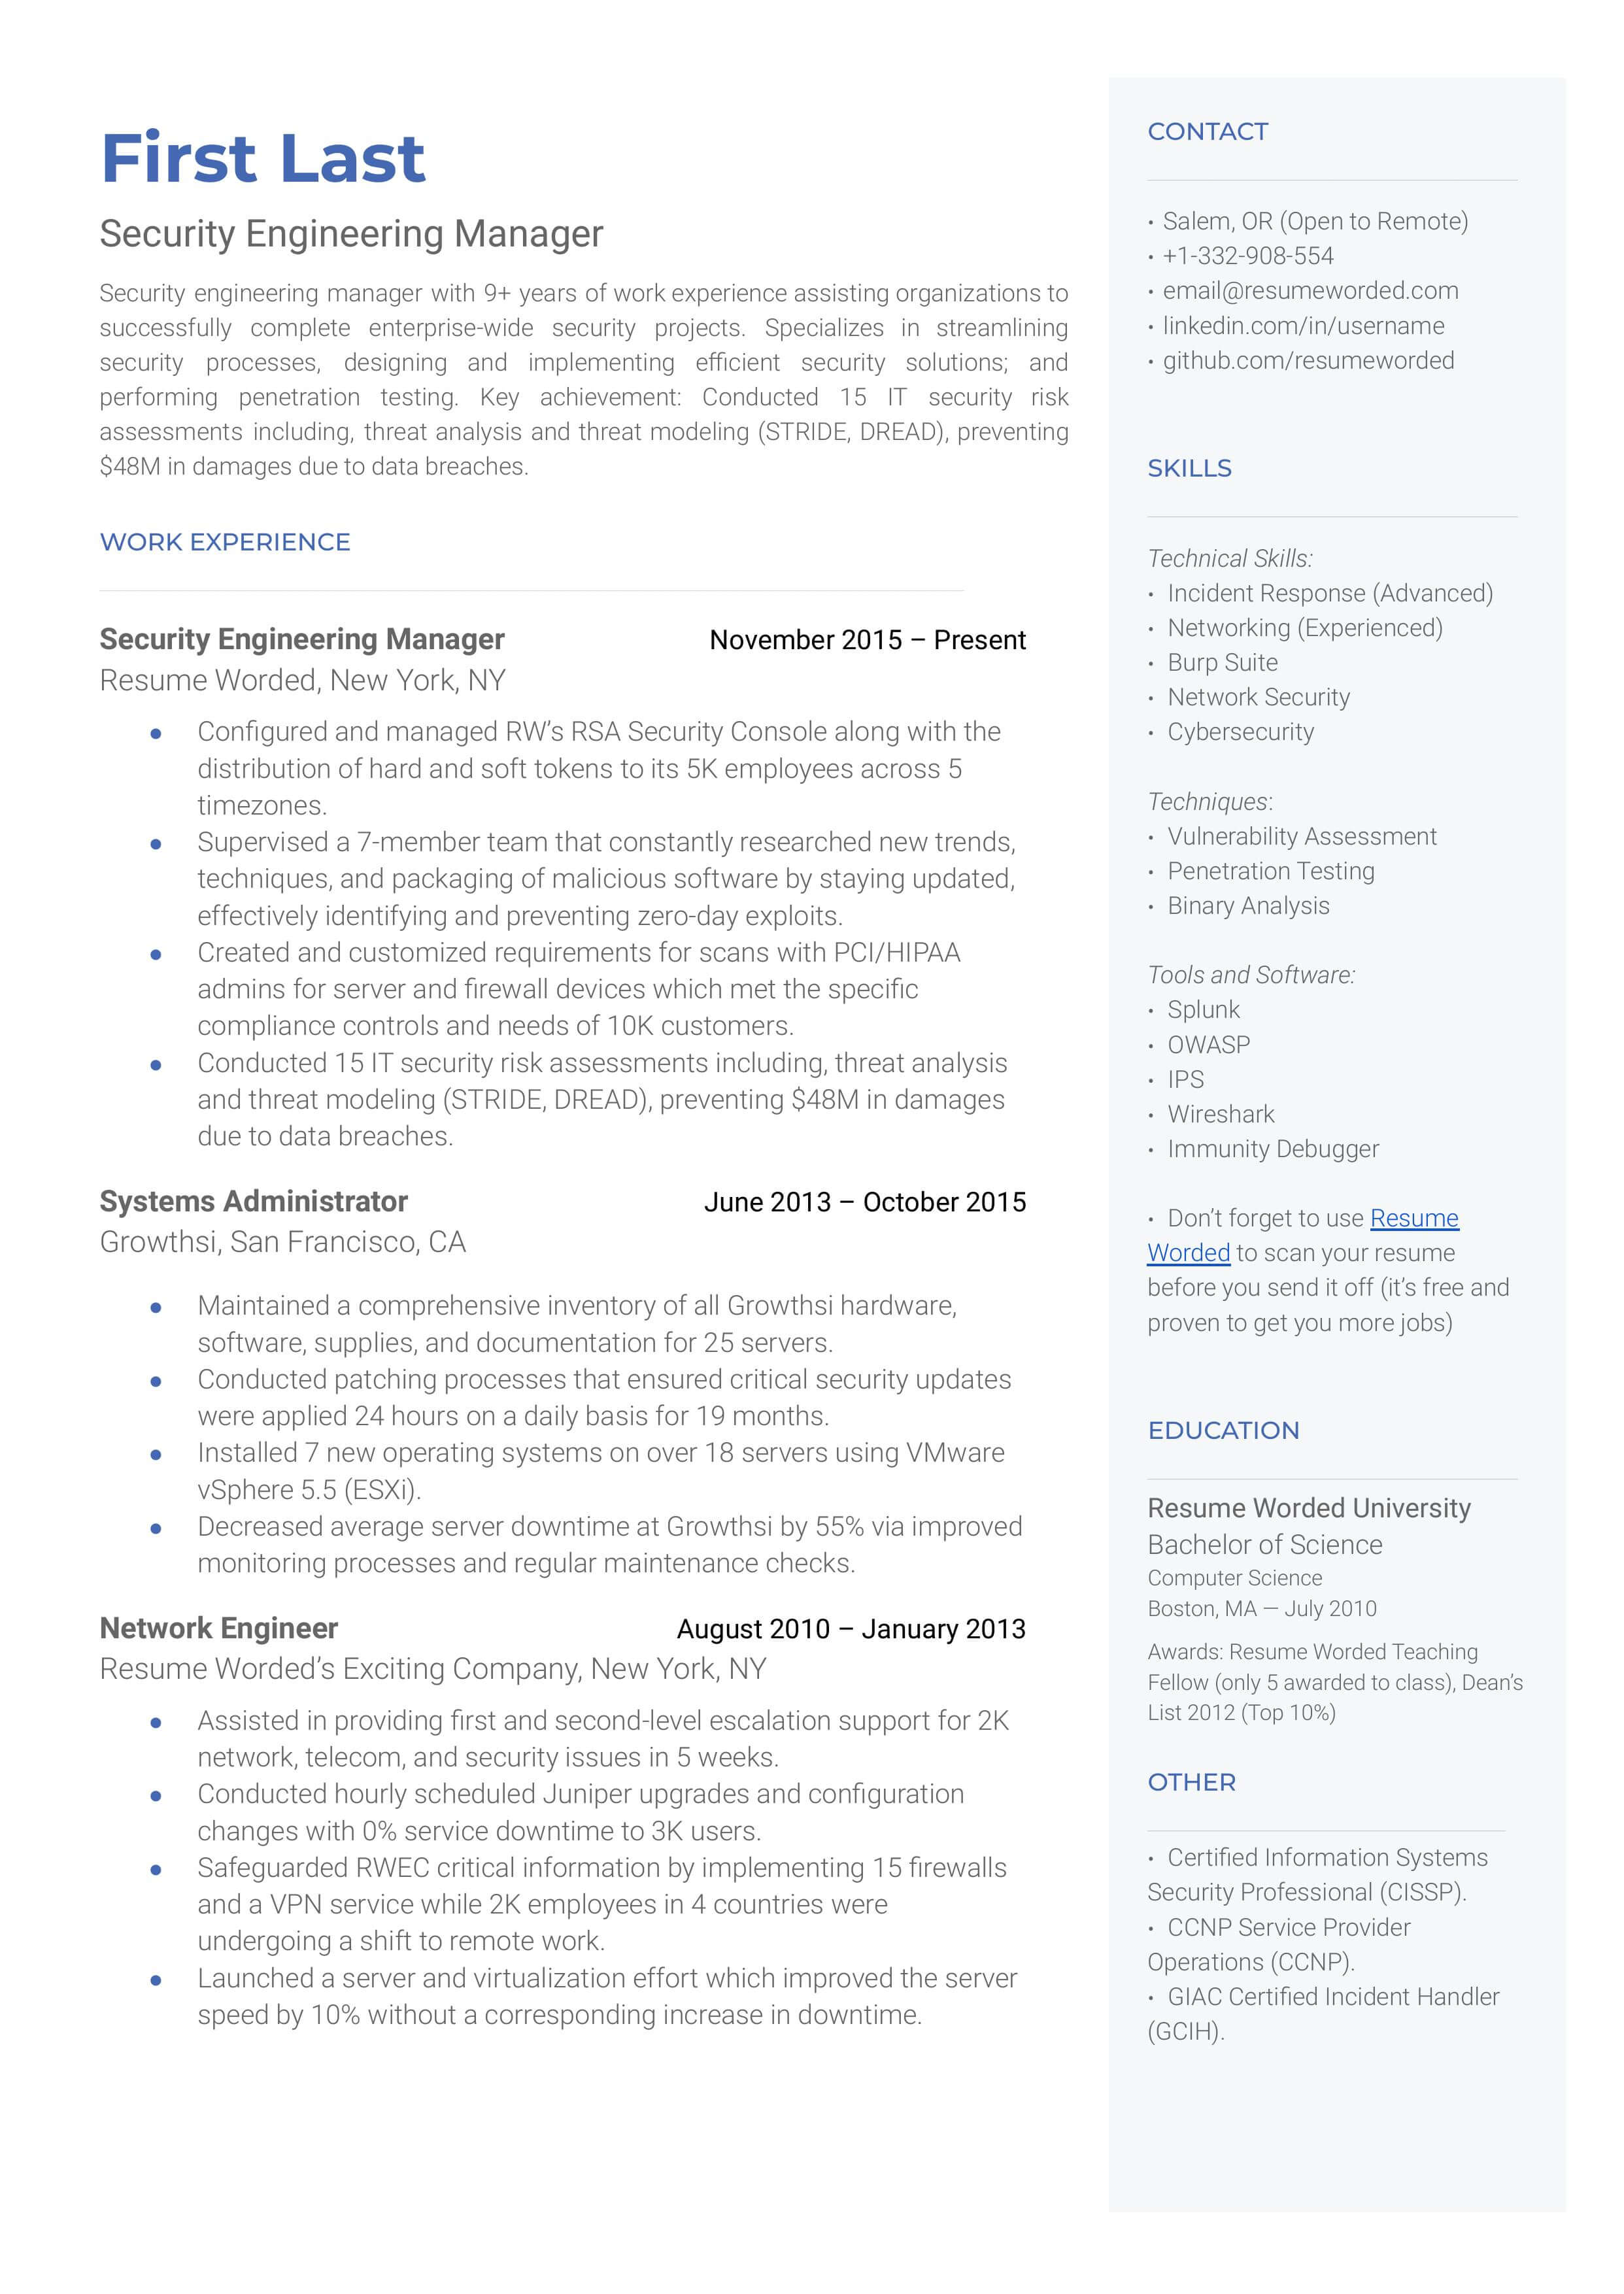 This security engineering manager resume template shows what a successful applicant can put in their resume.